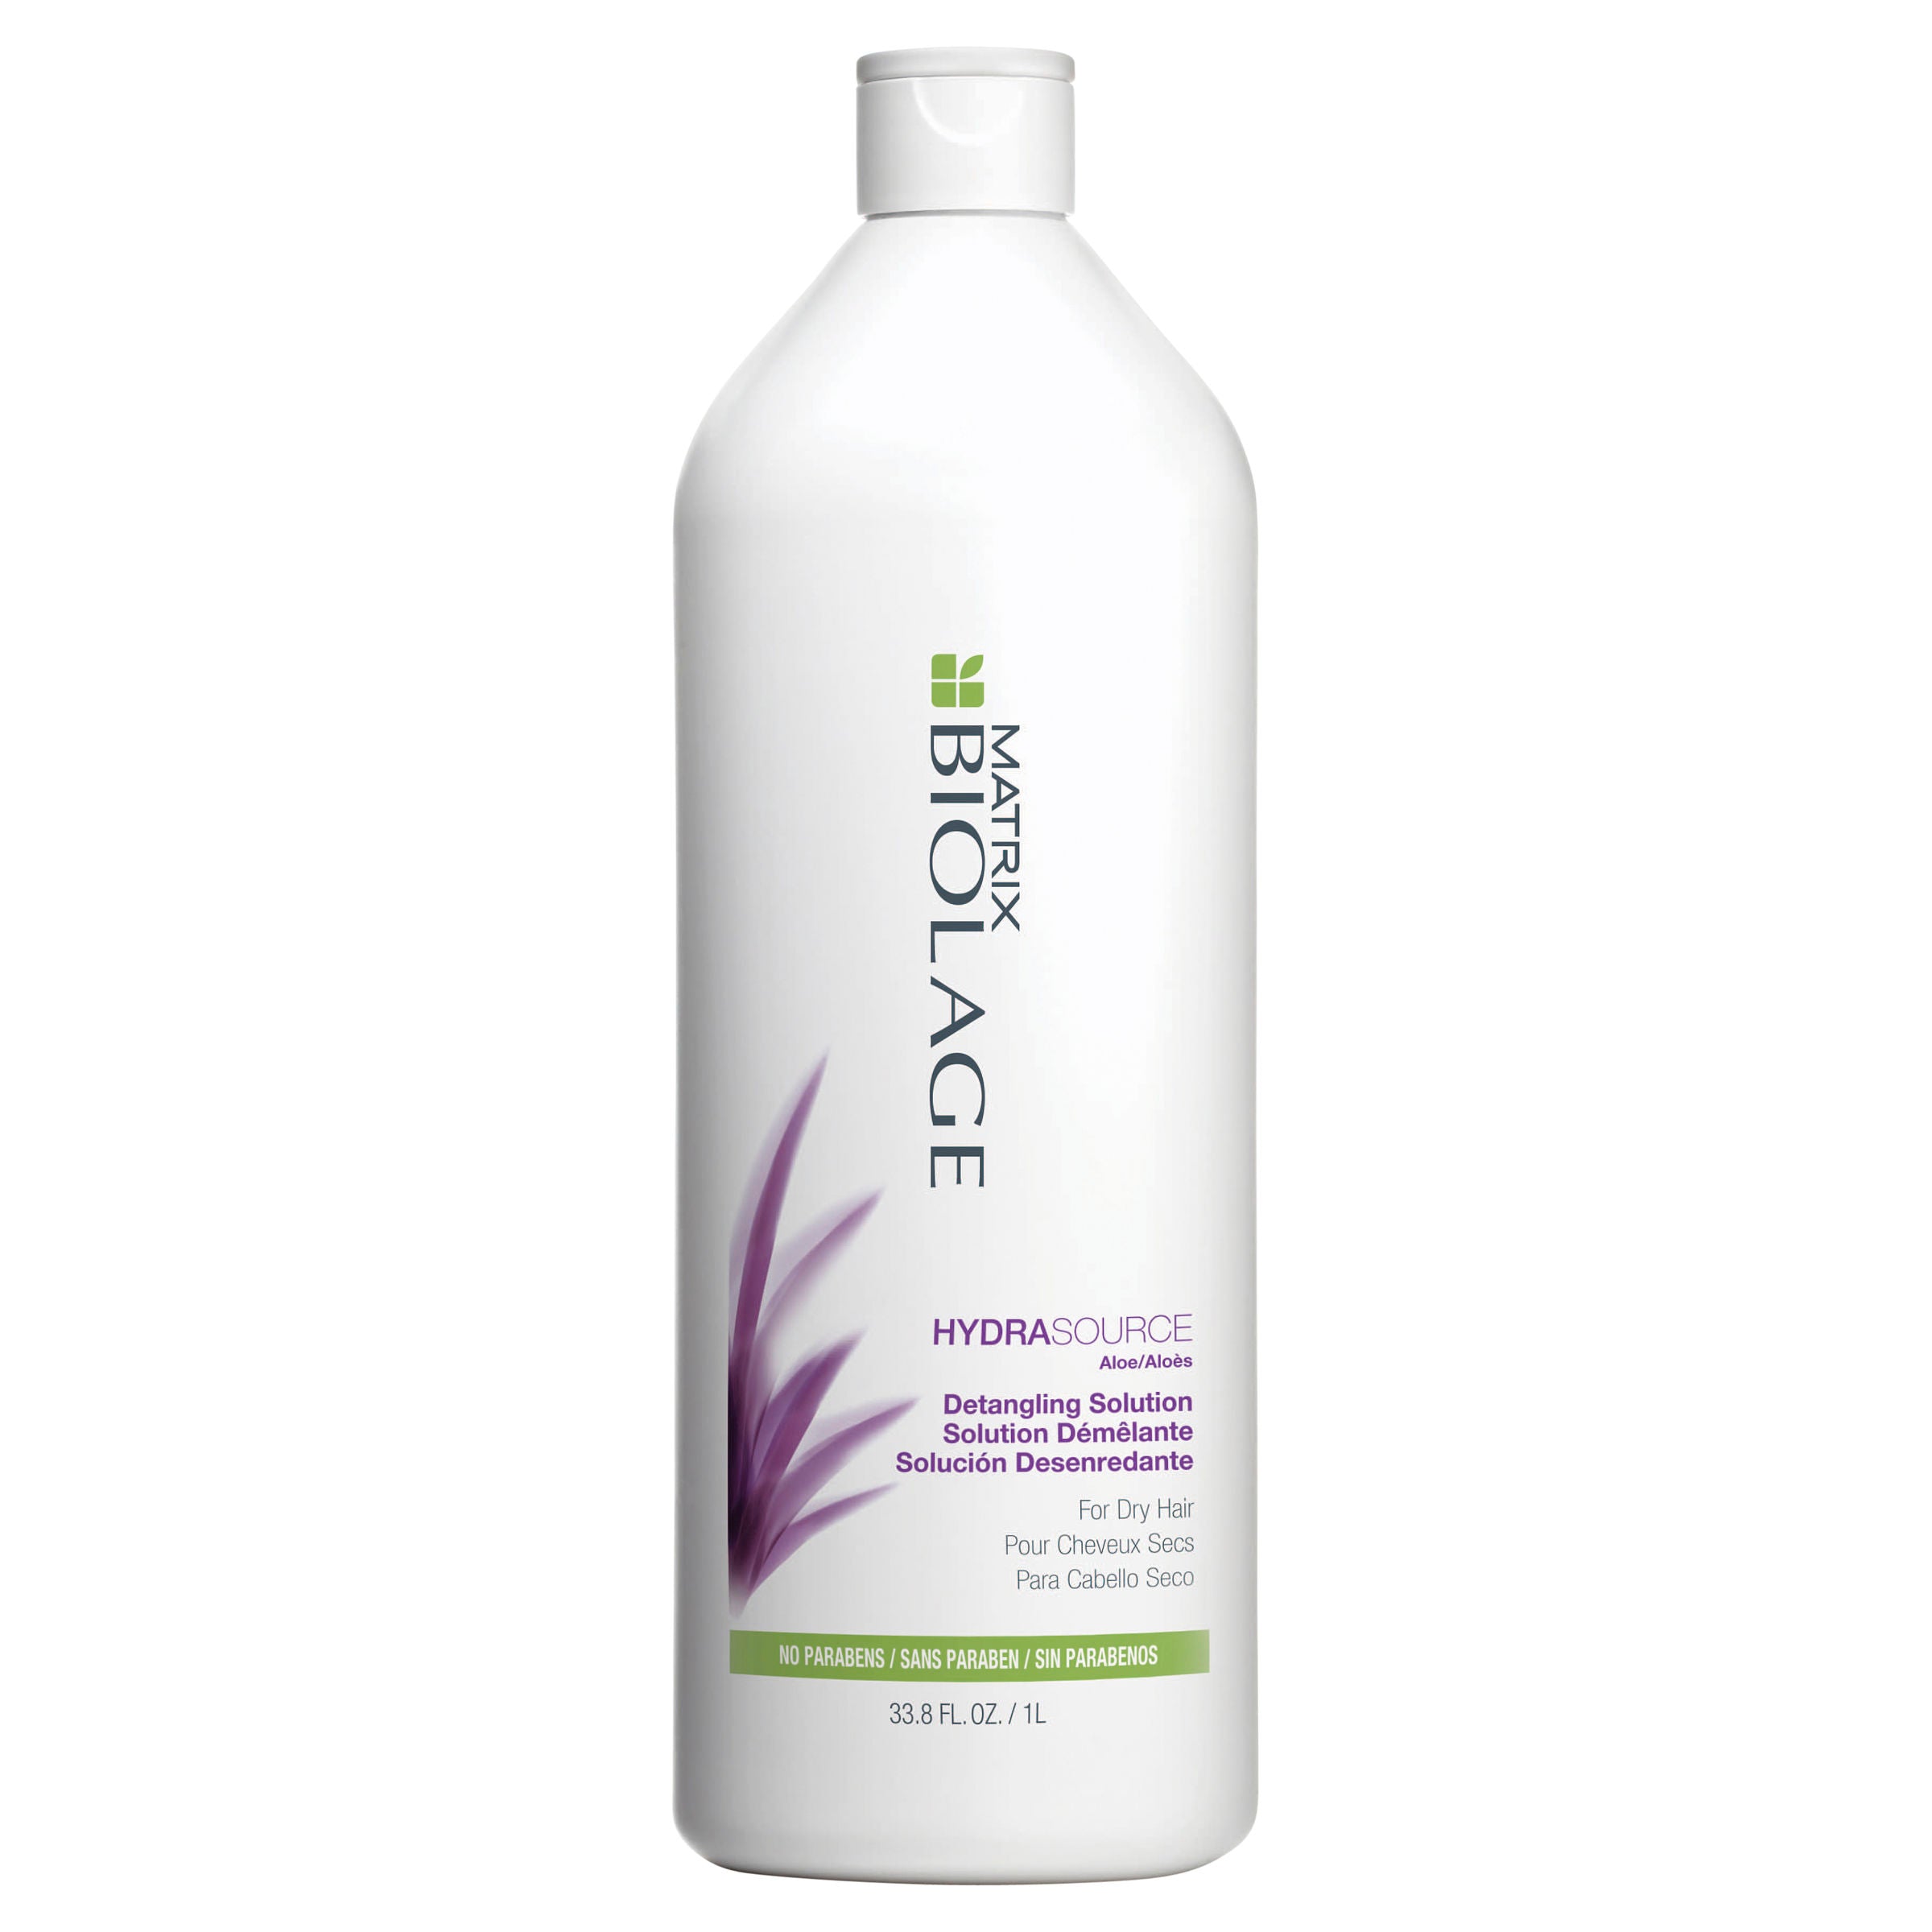 Biolage HydraSource Detangling solution for dry hair helps optimize moisture balance for healthy looking hair, detangles and controls static for less frizz and flyaways.